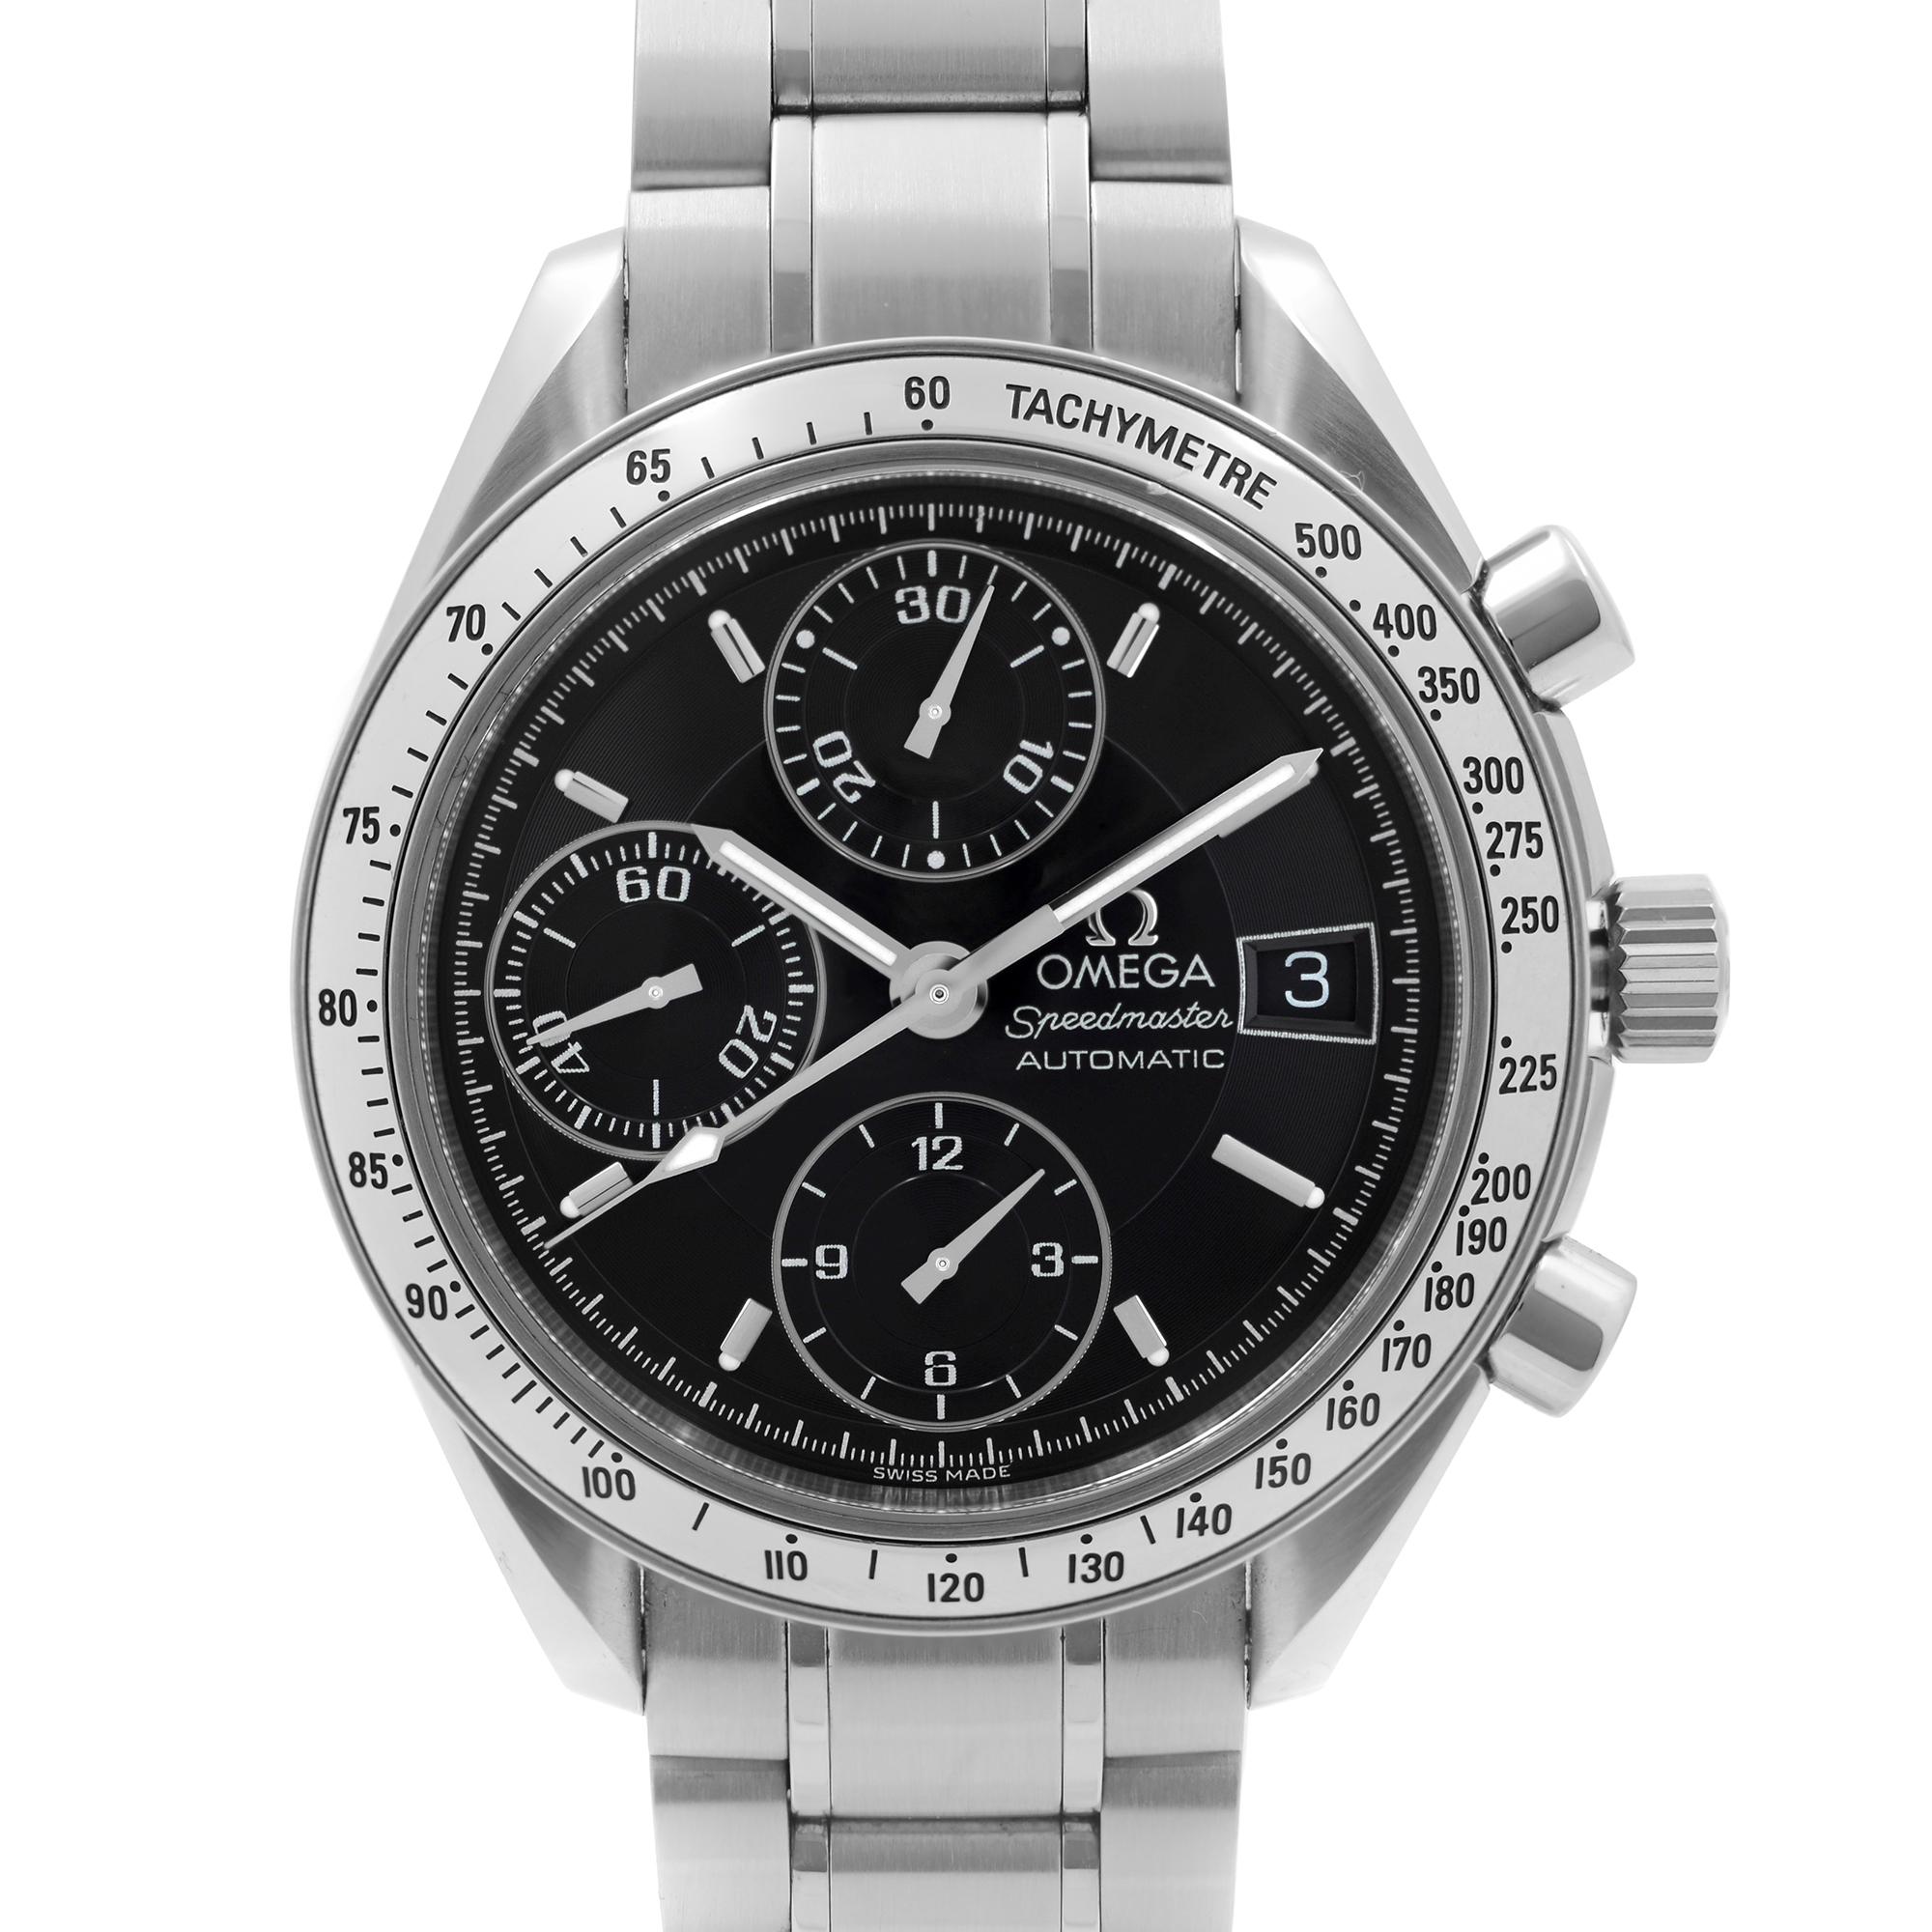 Pre Owned Omega Speedmaster Steel Chronograph Black Dial Automatic Men's Watch 3513.50.00. This Beautiful Timepiece Features: Stainless Steel Case and Bracelet, Fixed Stainless Steel Bezel with Tachymeter, Black Dial with Luminous Silver-Tone Hands,